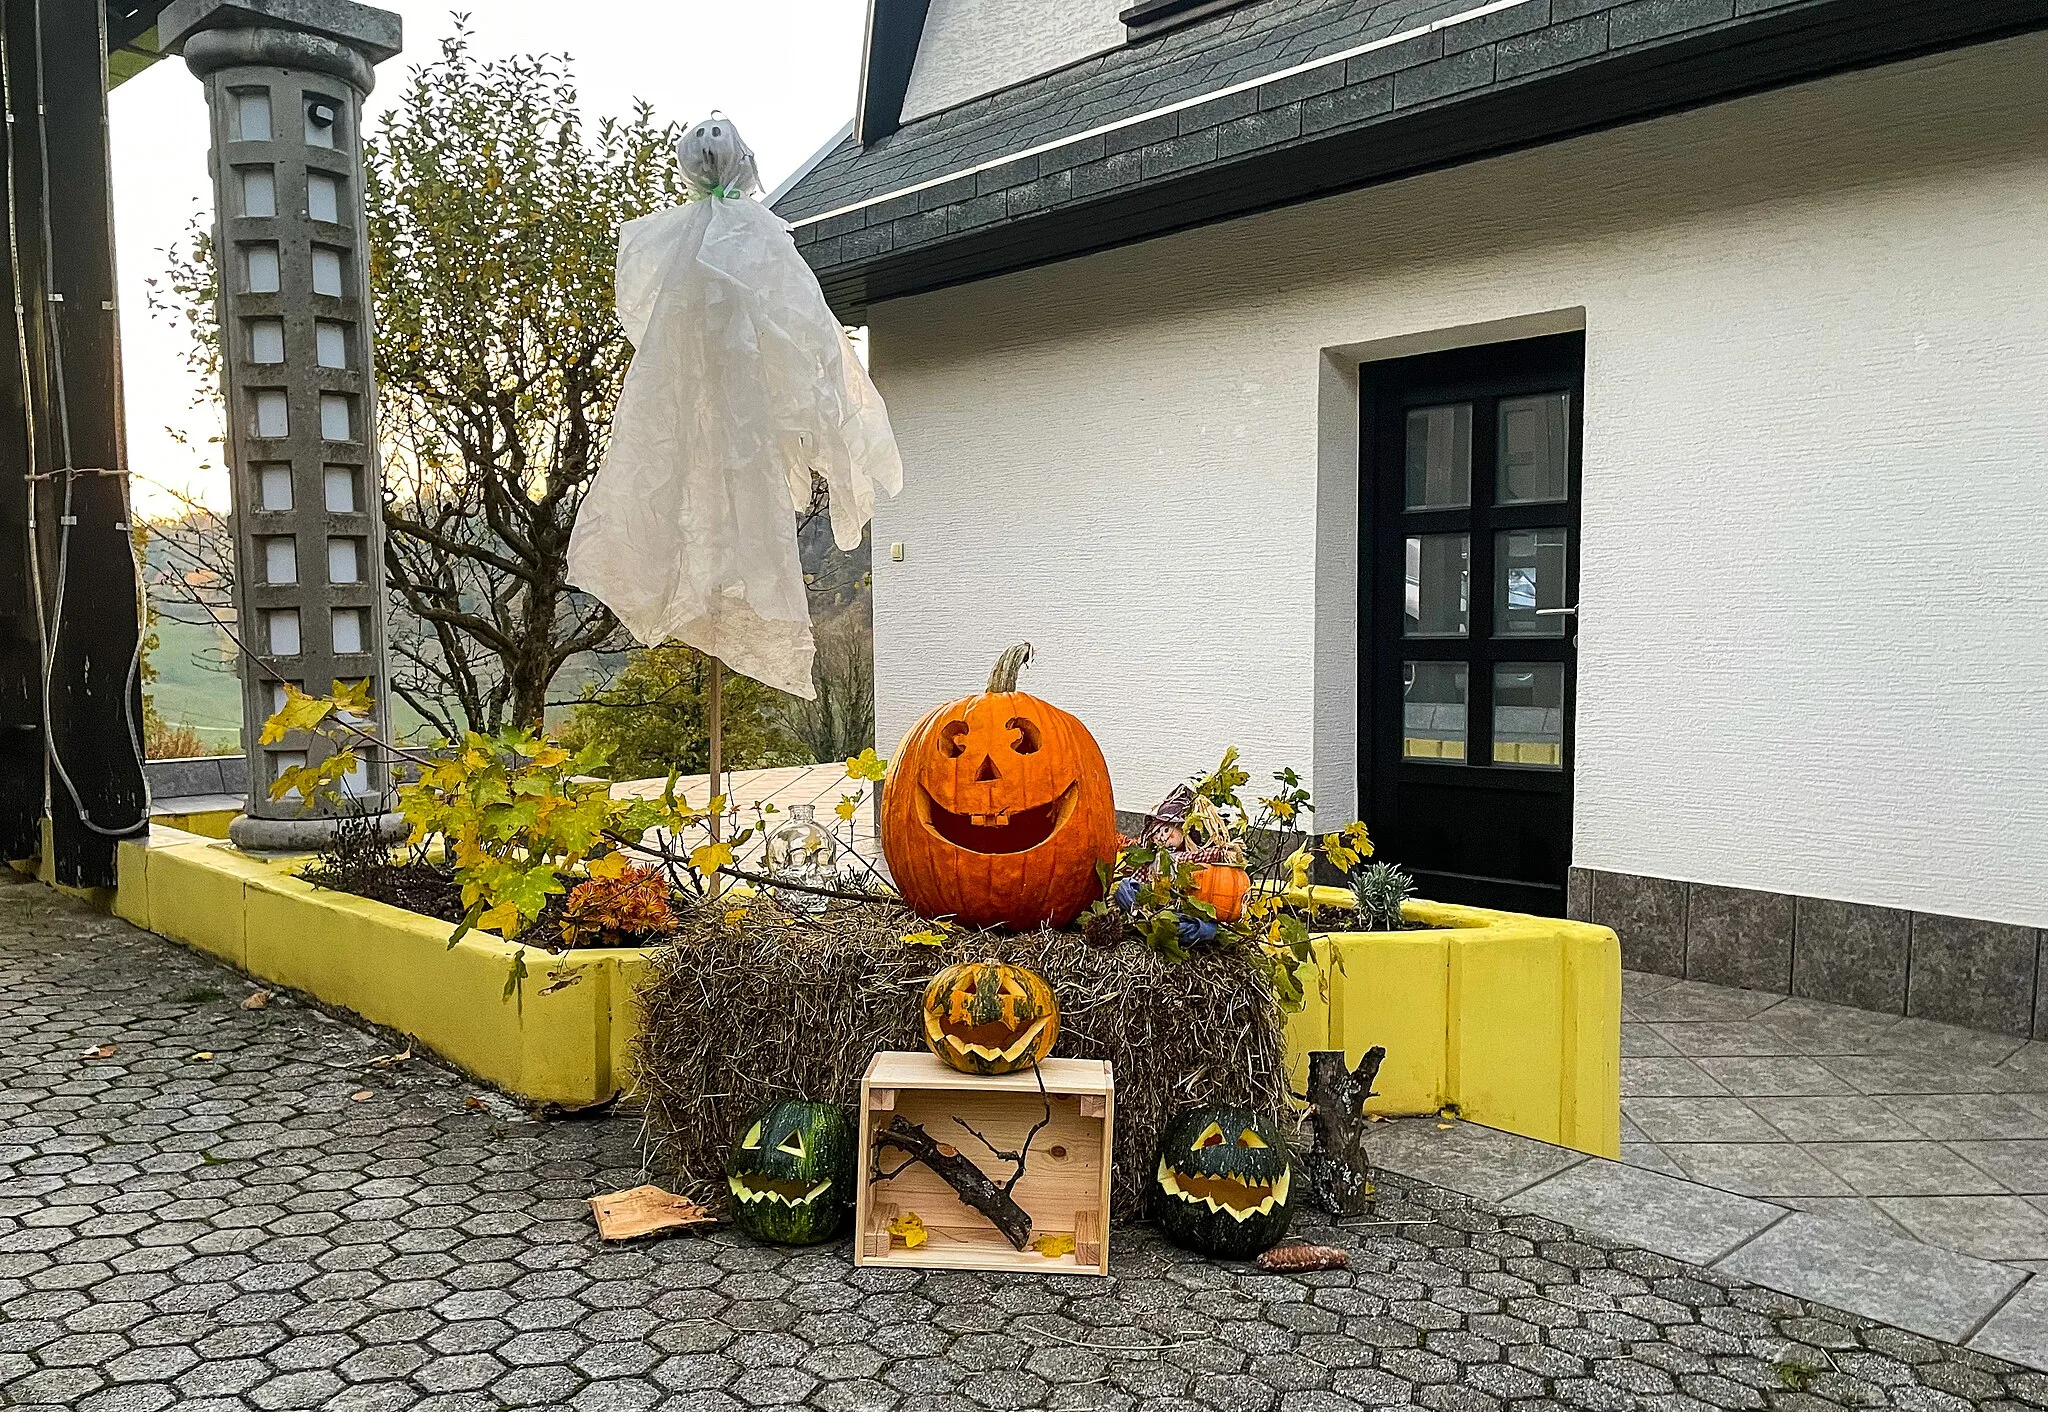 Photo showing: Carved pumpkins near black house door, side view